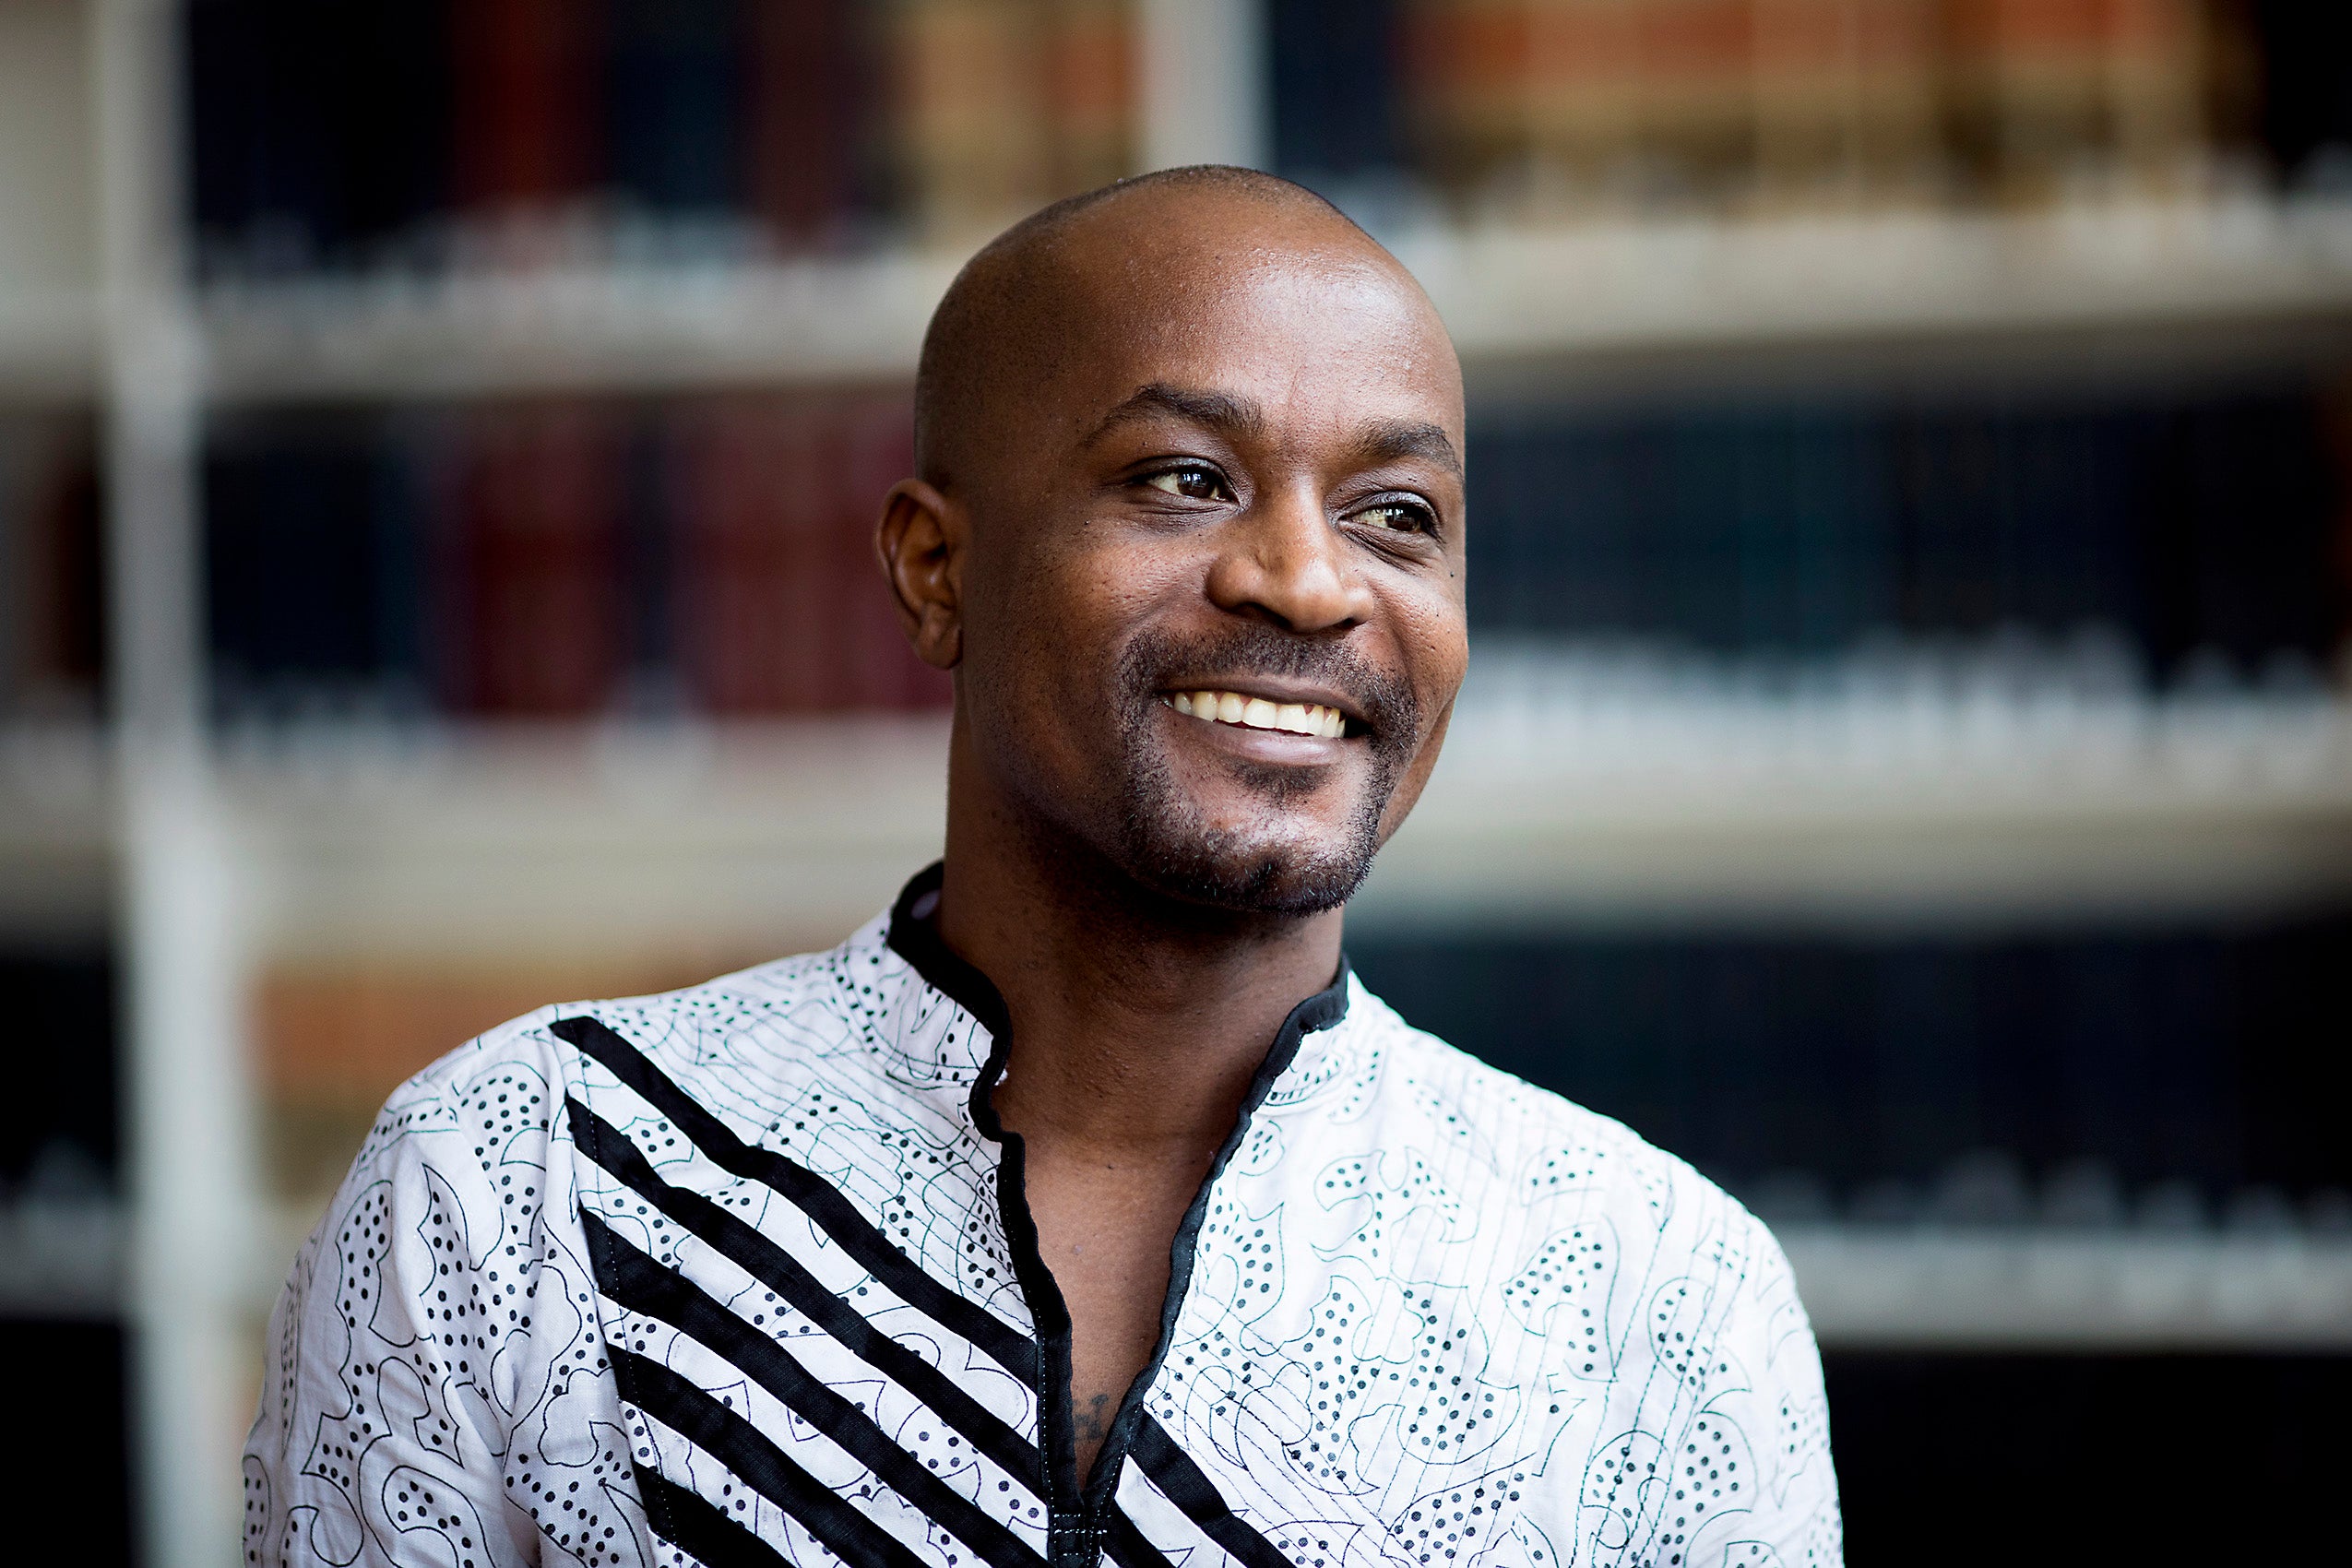 Eric Gitari LL.M. ’18 on litigating a landmark LGBT case in Kenya: ‘This case has given people confidence to see what’s possible’